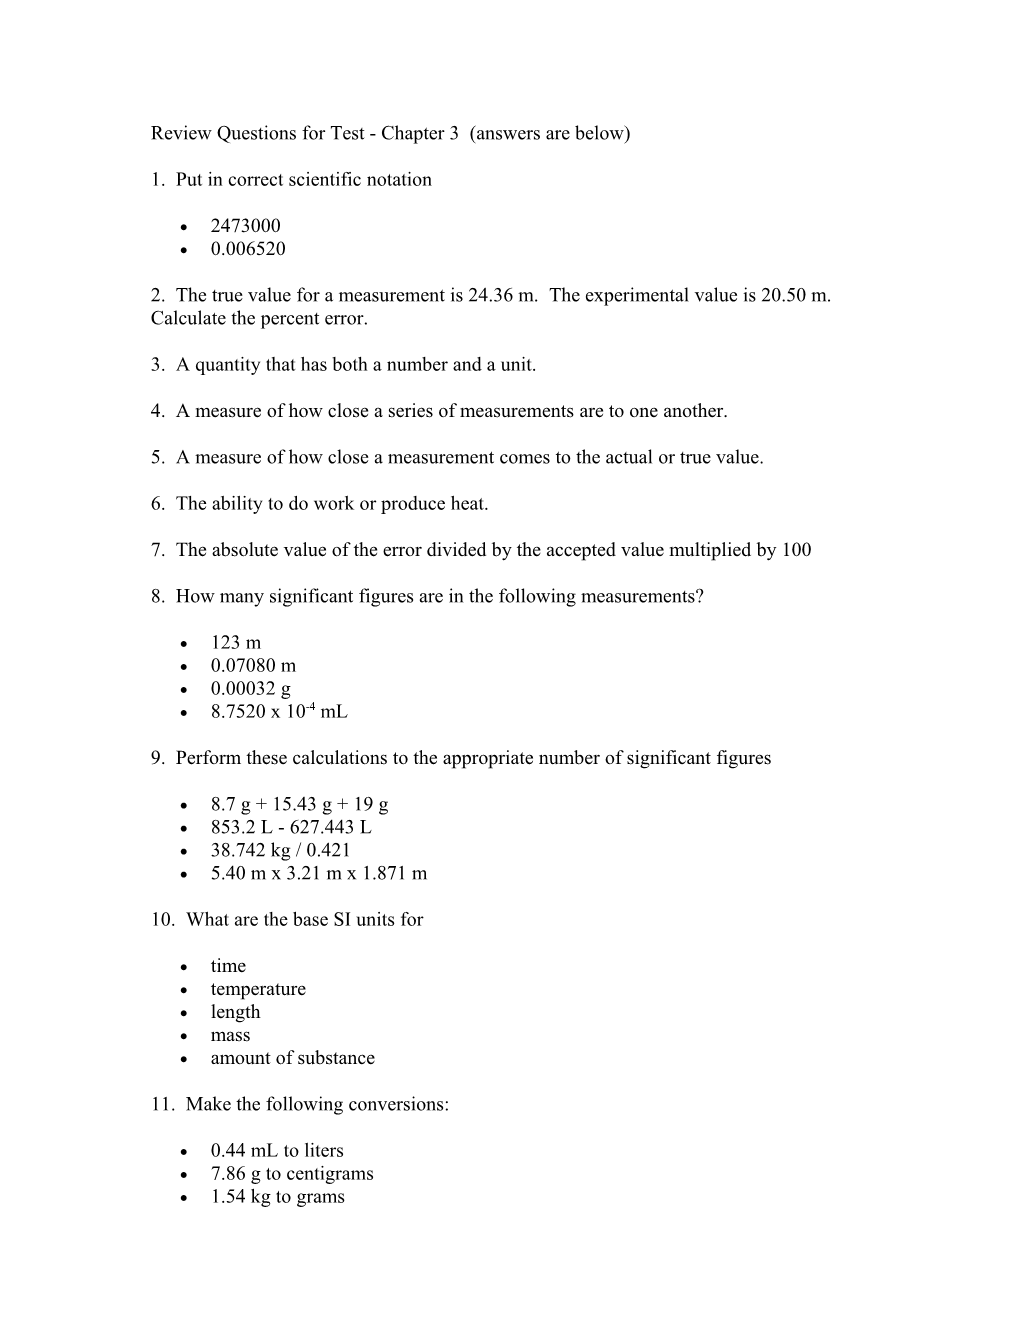 Review Questions for Test - Chapter 3 (Answers Are Below)